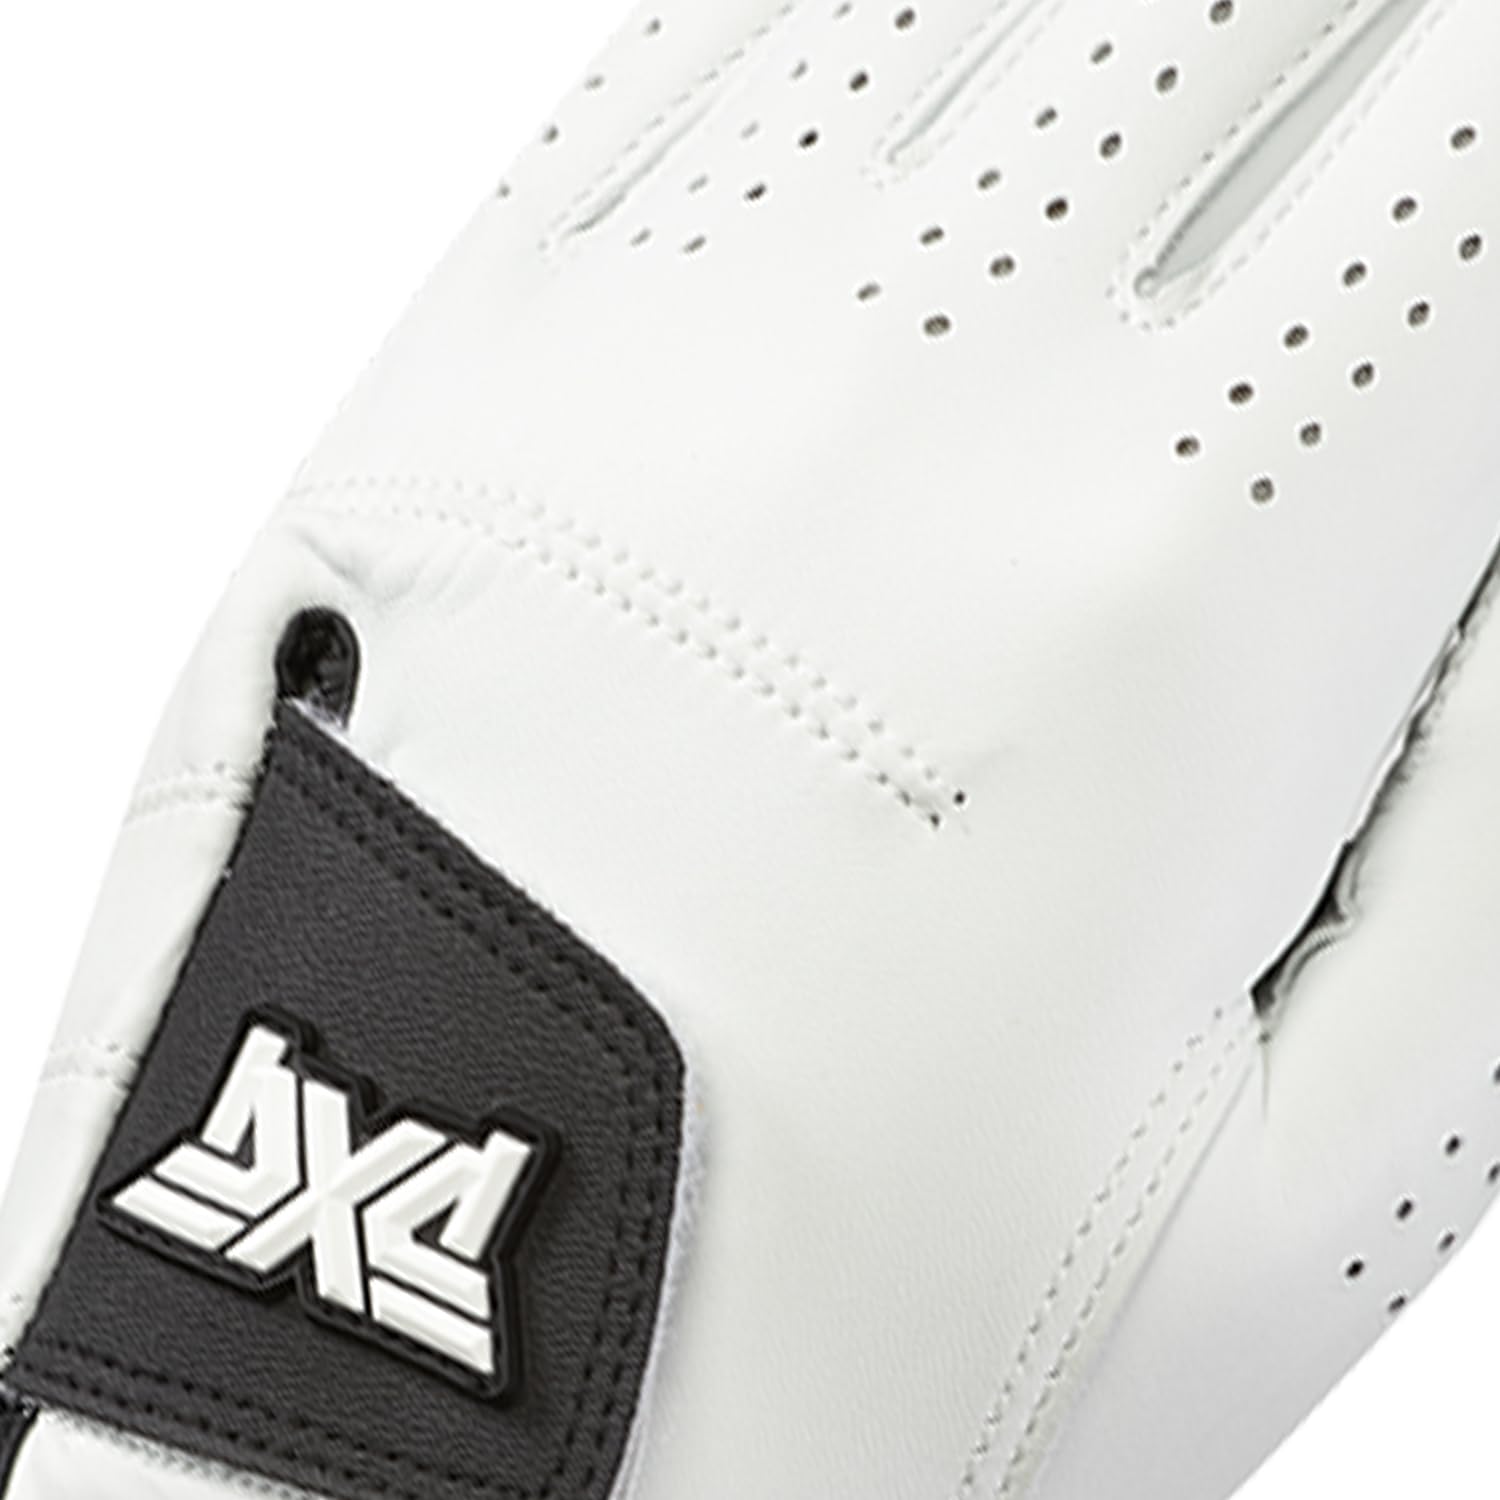 PXG Women's Players Tour Golf Glove - 100% Cabretta Leather with Cotton-Based Elastic Wristband